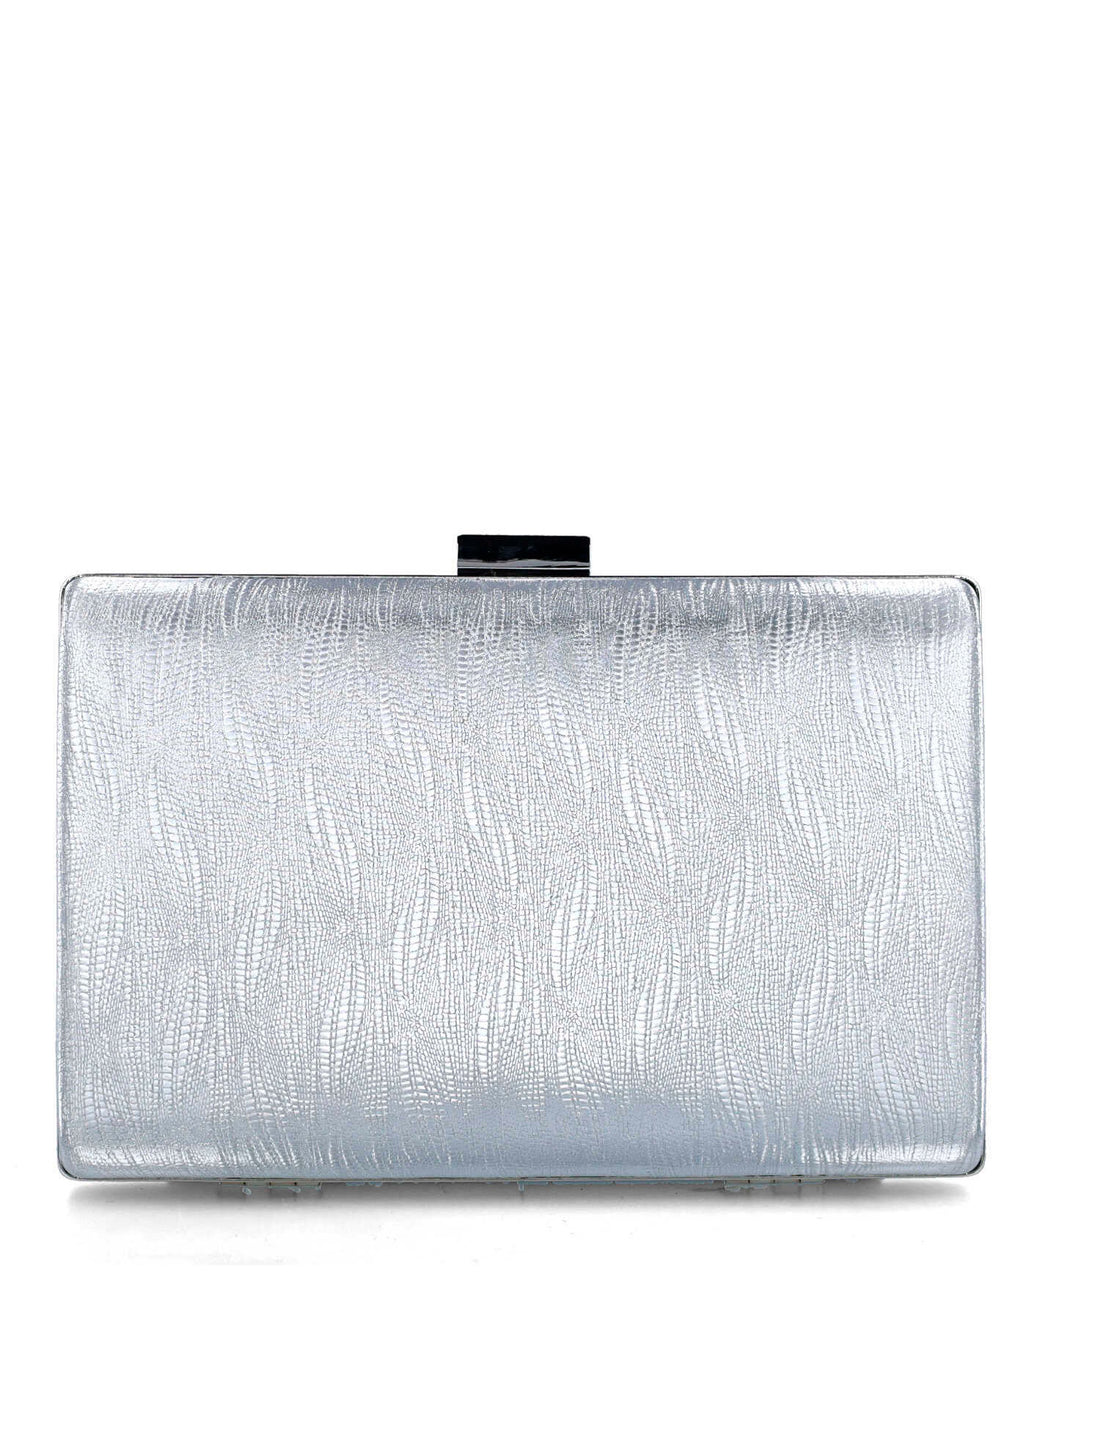 Silver Clutch With Design_85496_09_01